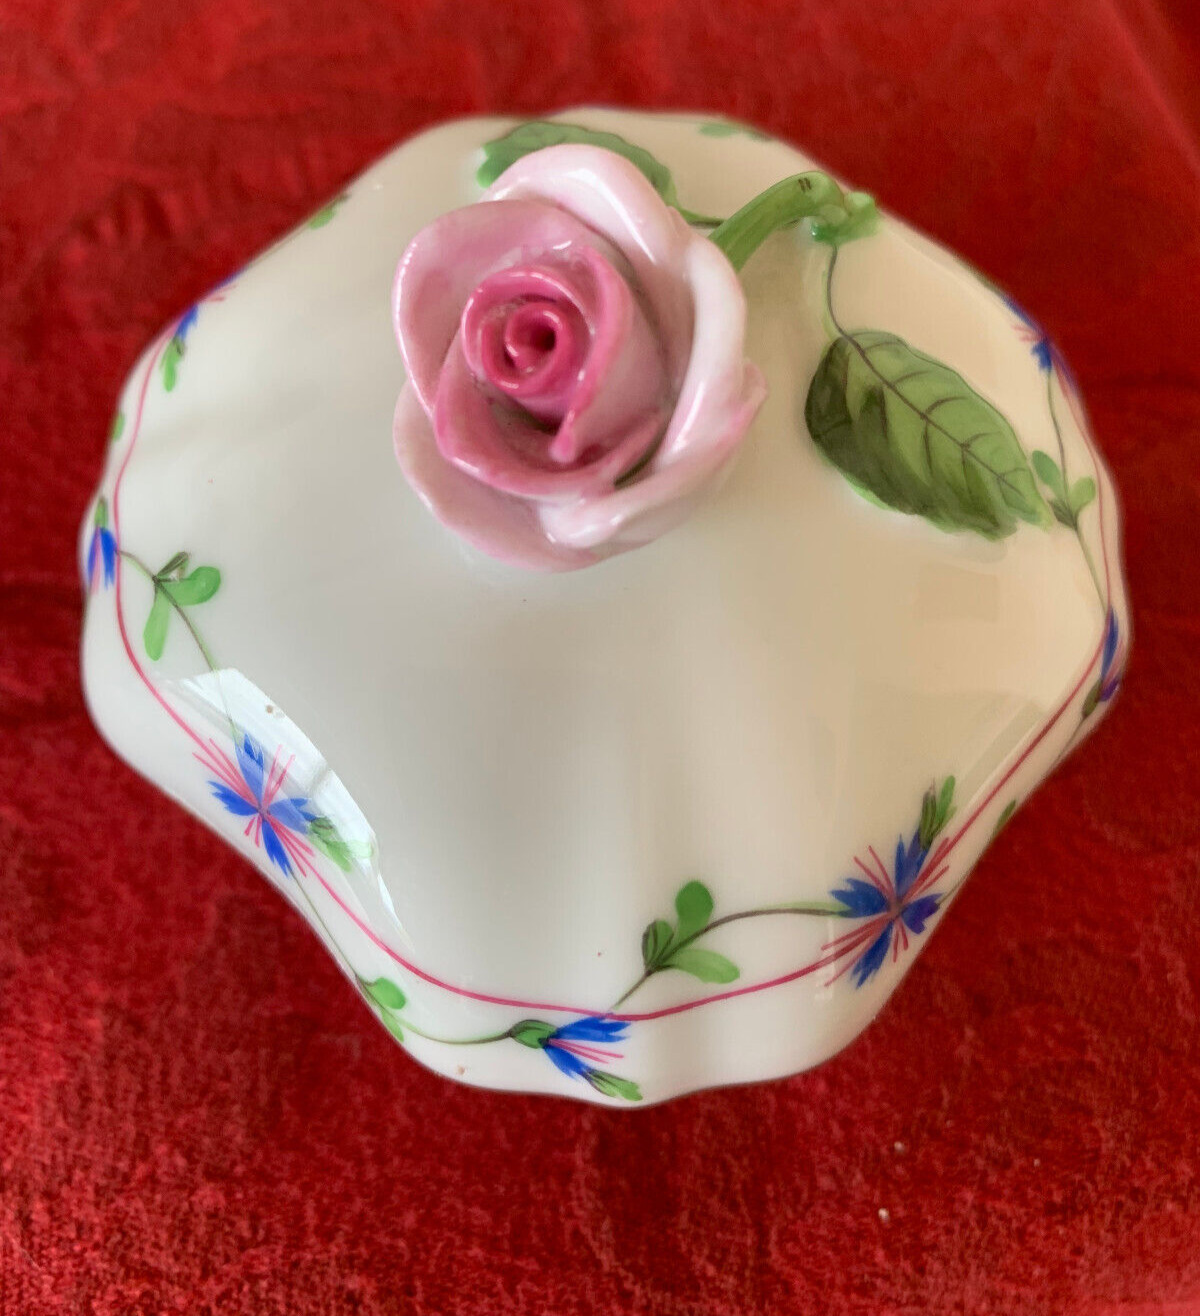 Herend Hungary Footed Trinket Box Hand Painted 6179 / PBG Encrusted Rose Top